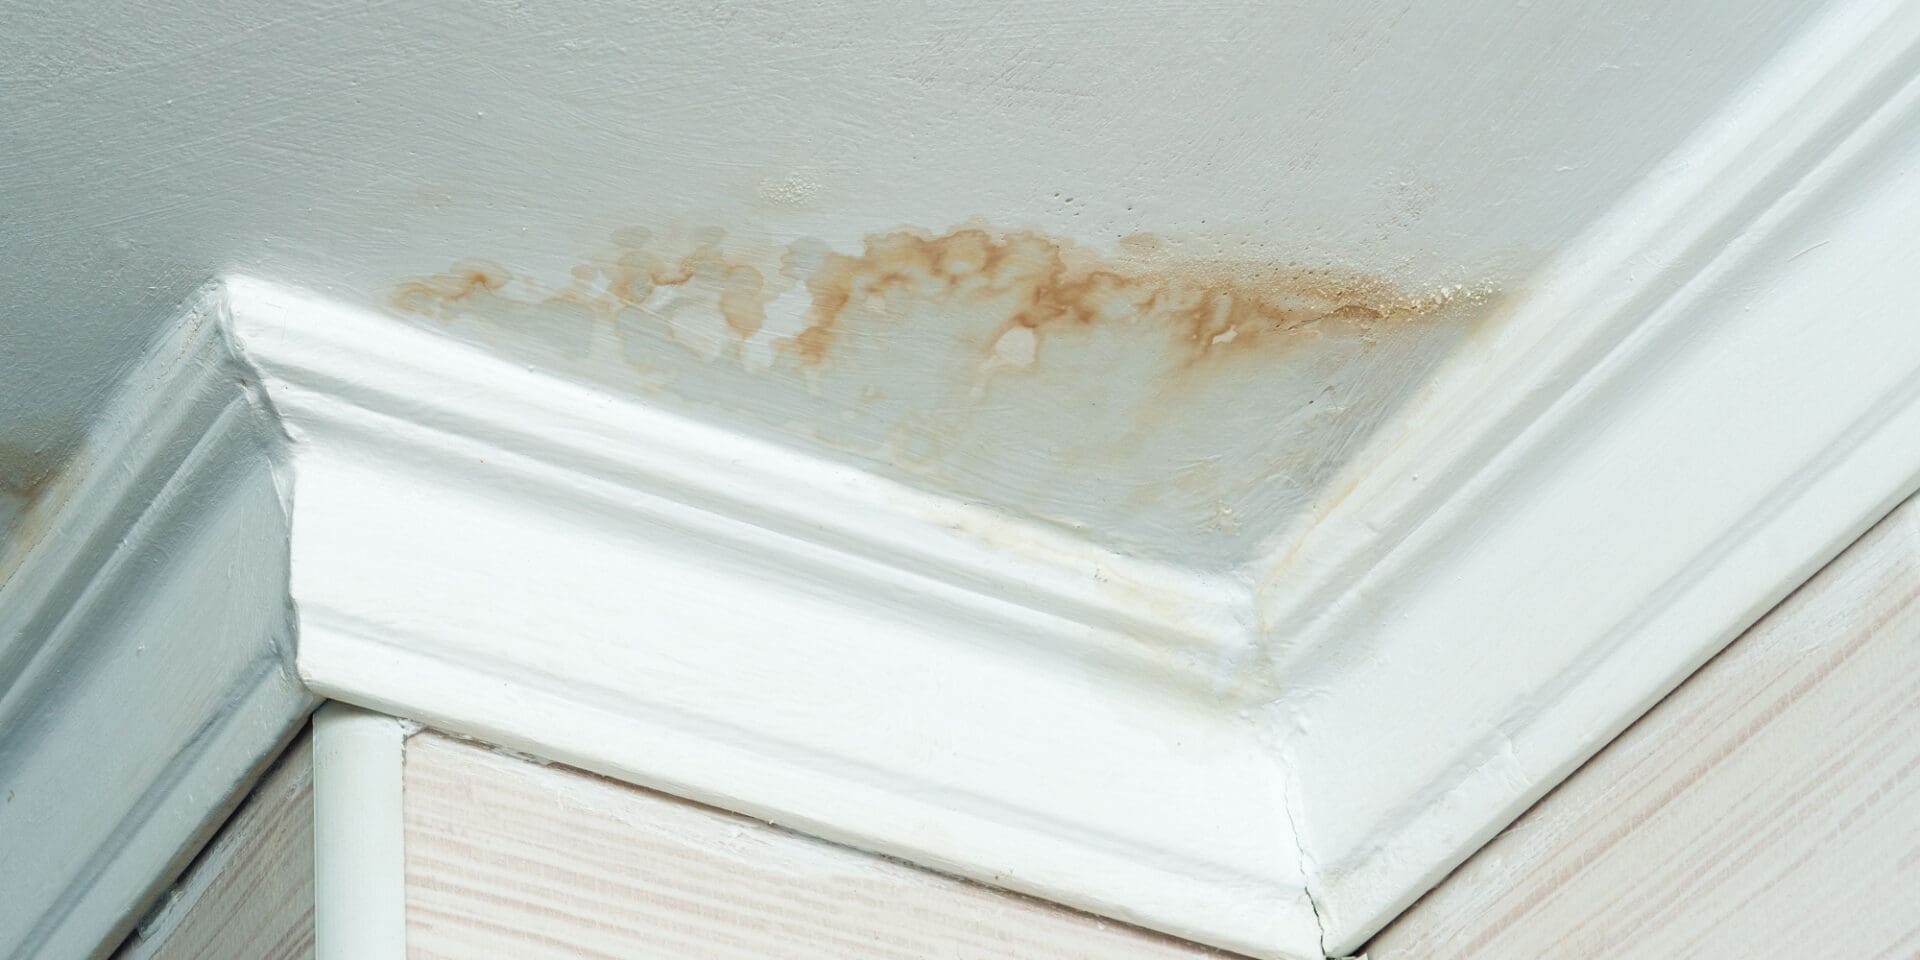 Signs of a leaky roof